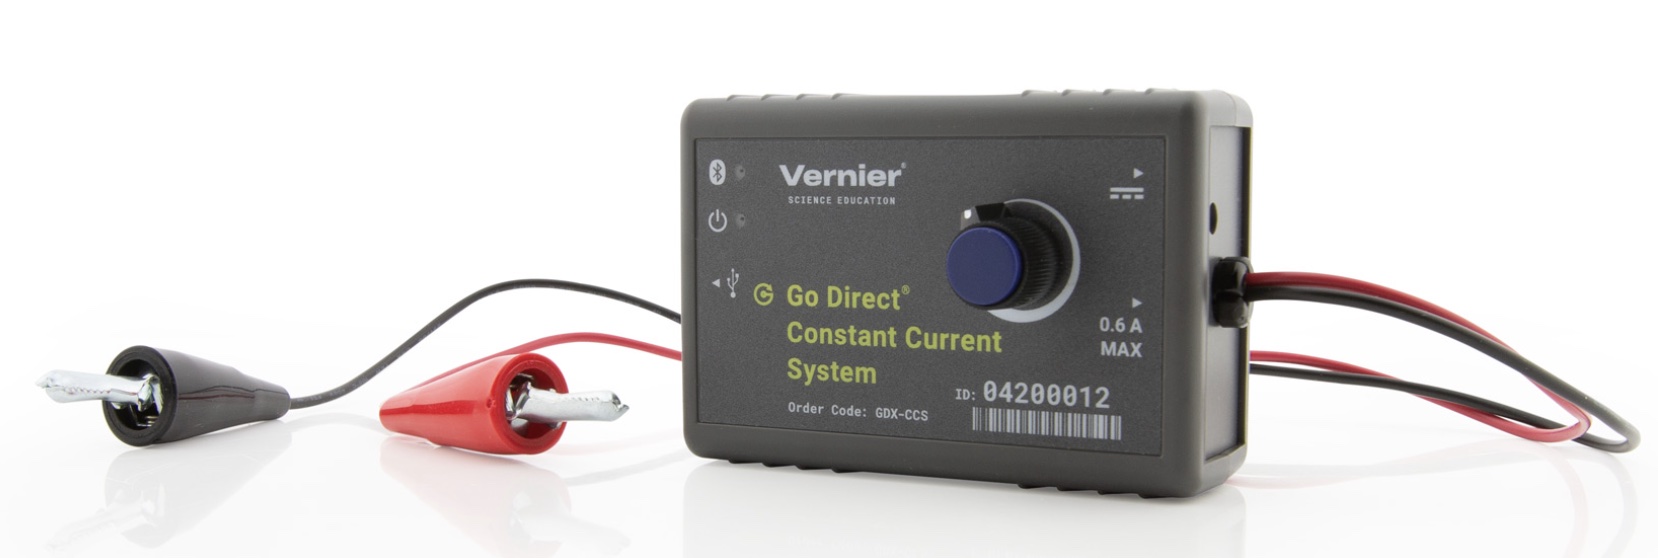 Constant current Power Supply Vernier Go Direct